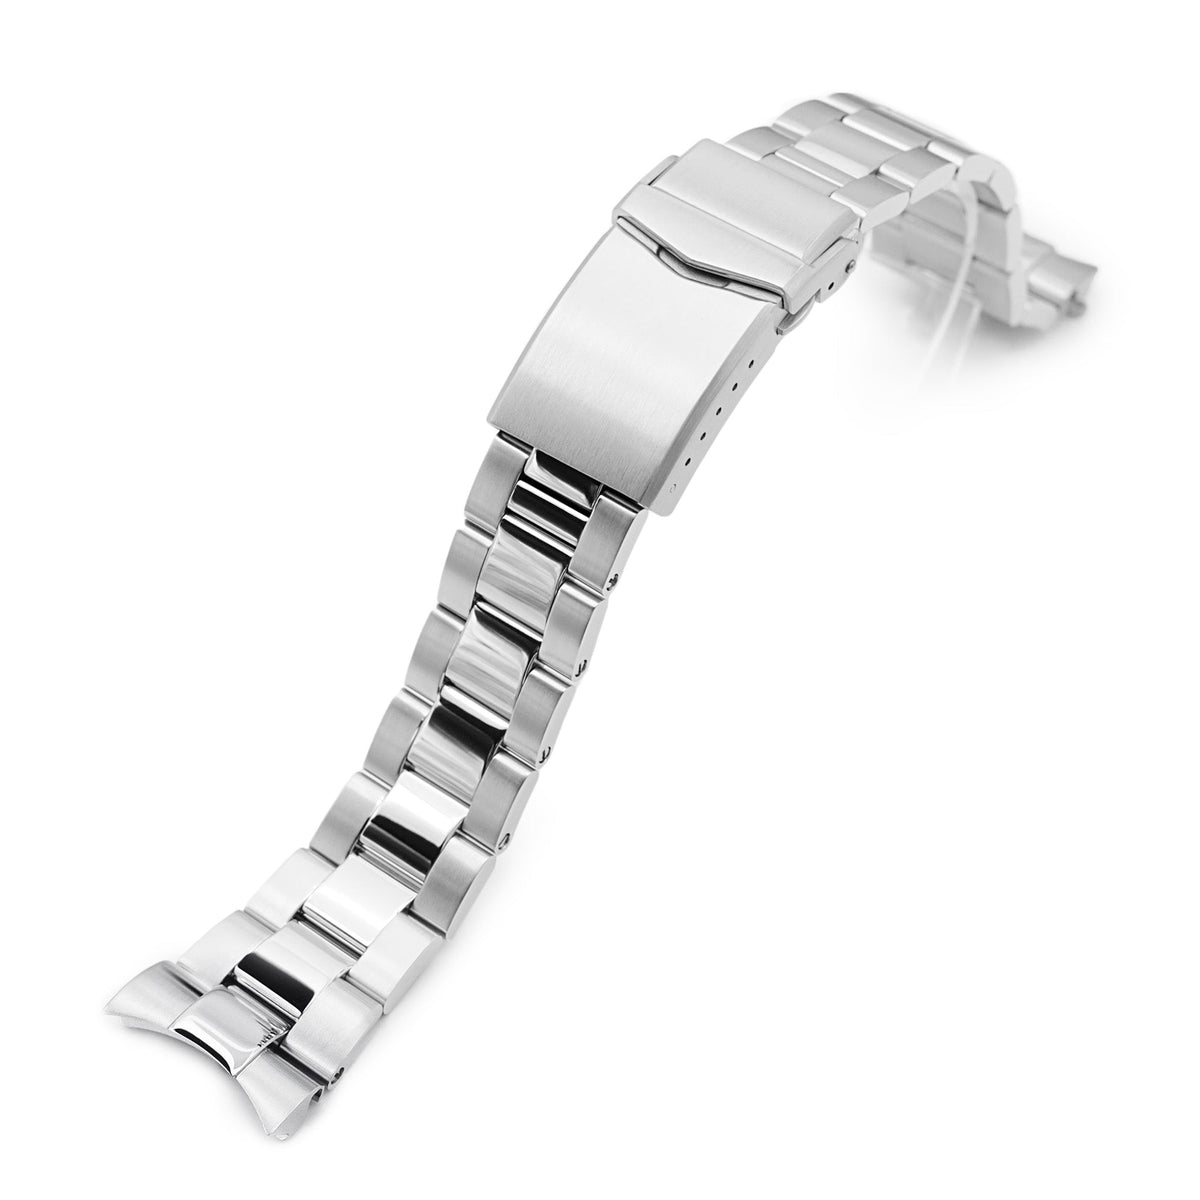 22mm Super-O Boyer Watch Band for Orient Kamasu, 316L Stainless Steel Brushed and Polished V-Clasp Strapcode Watch Bands